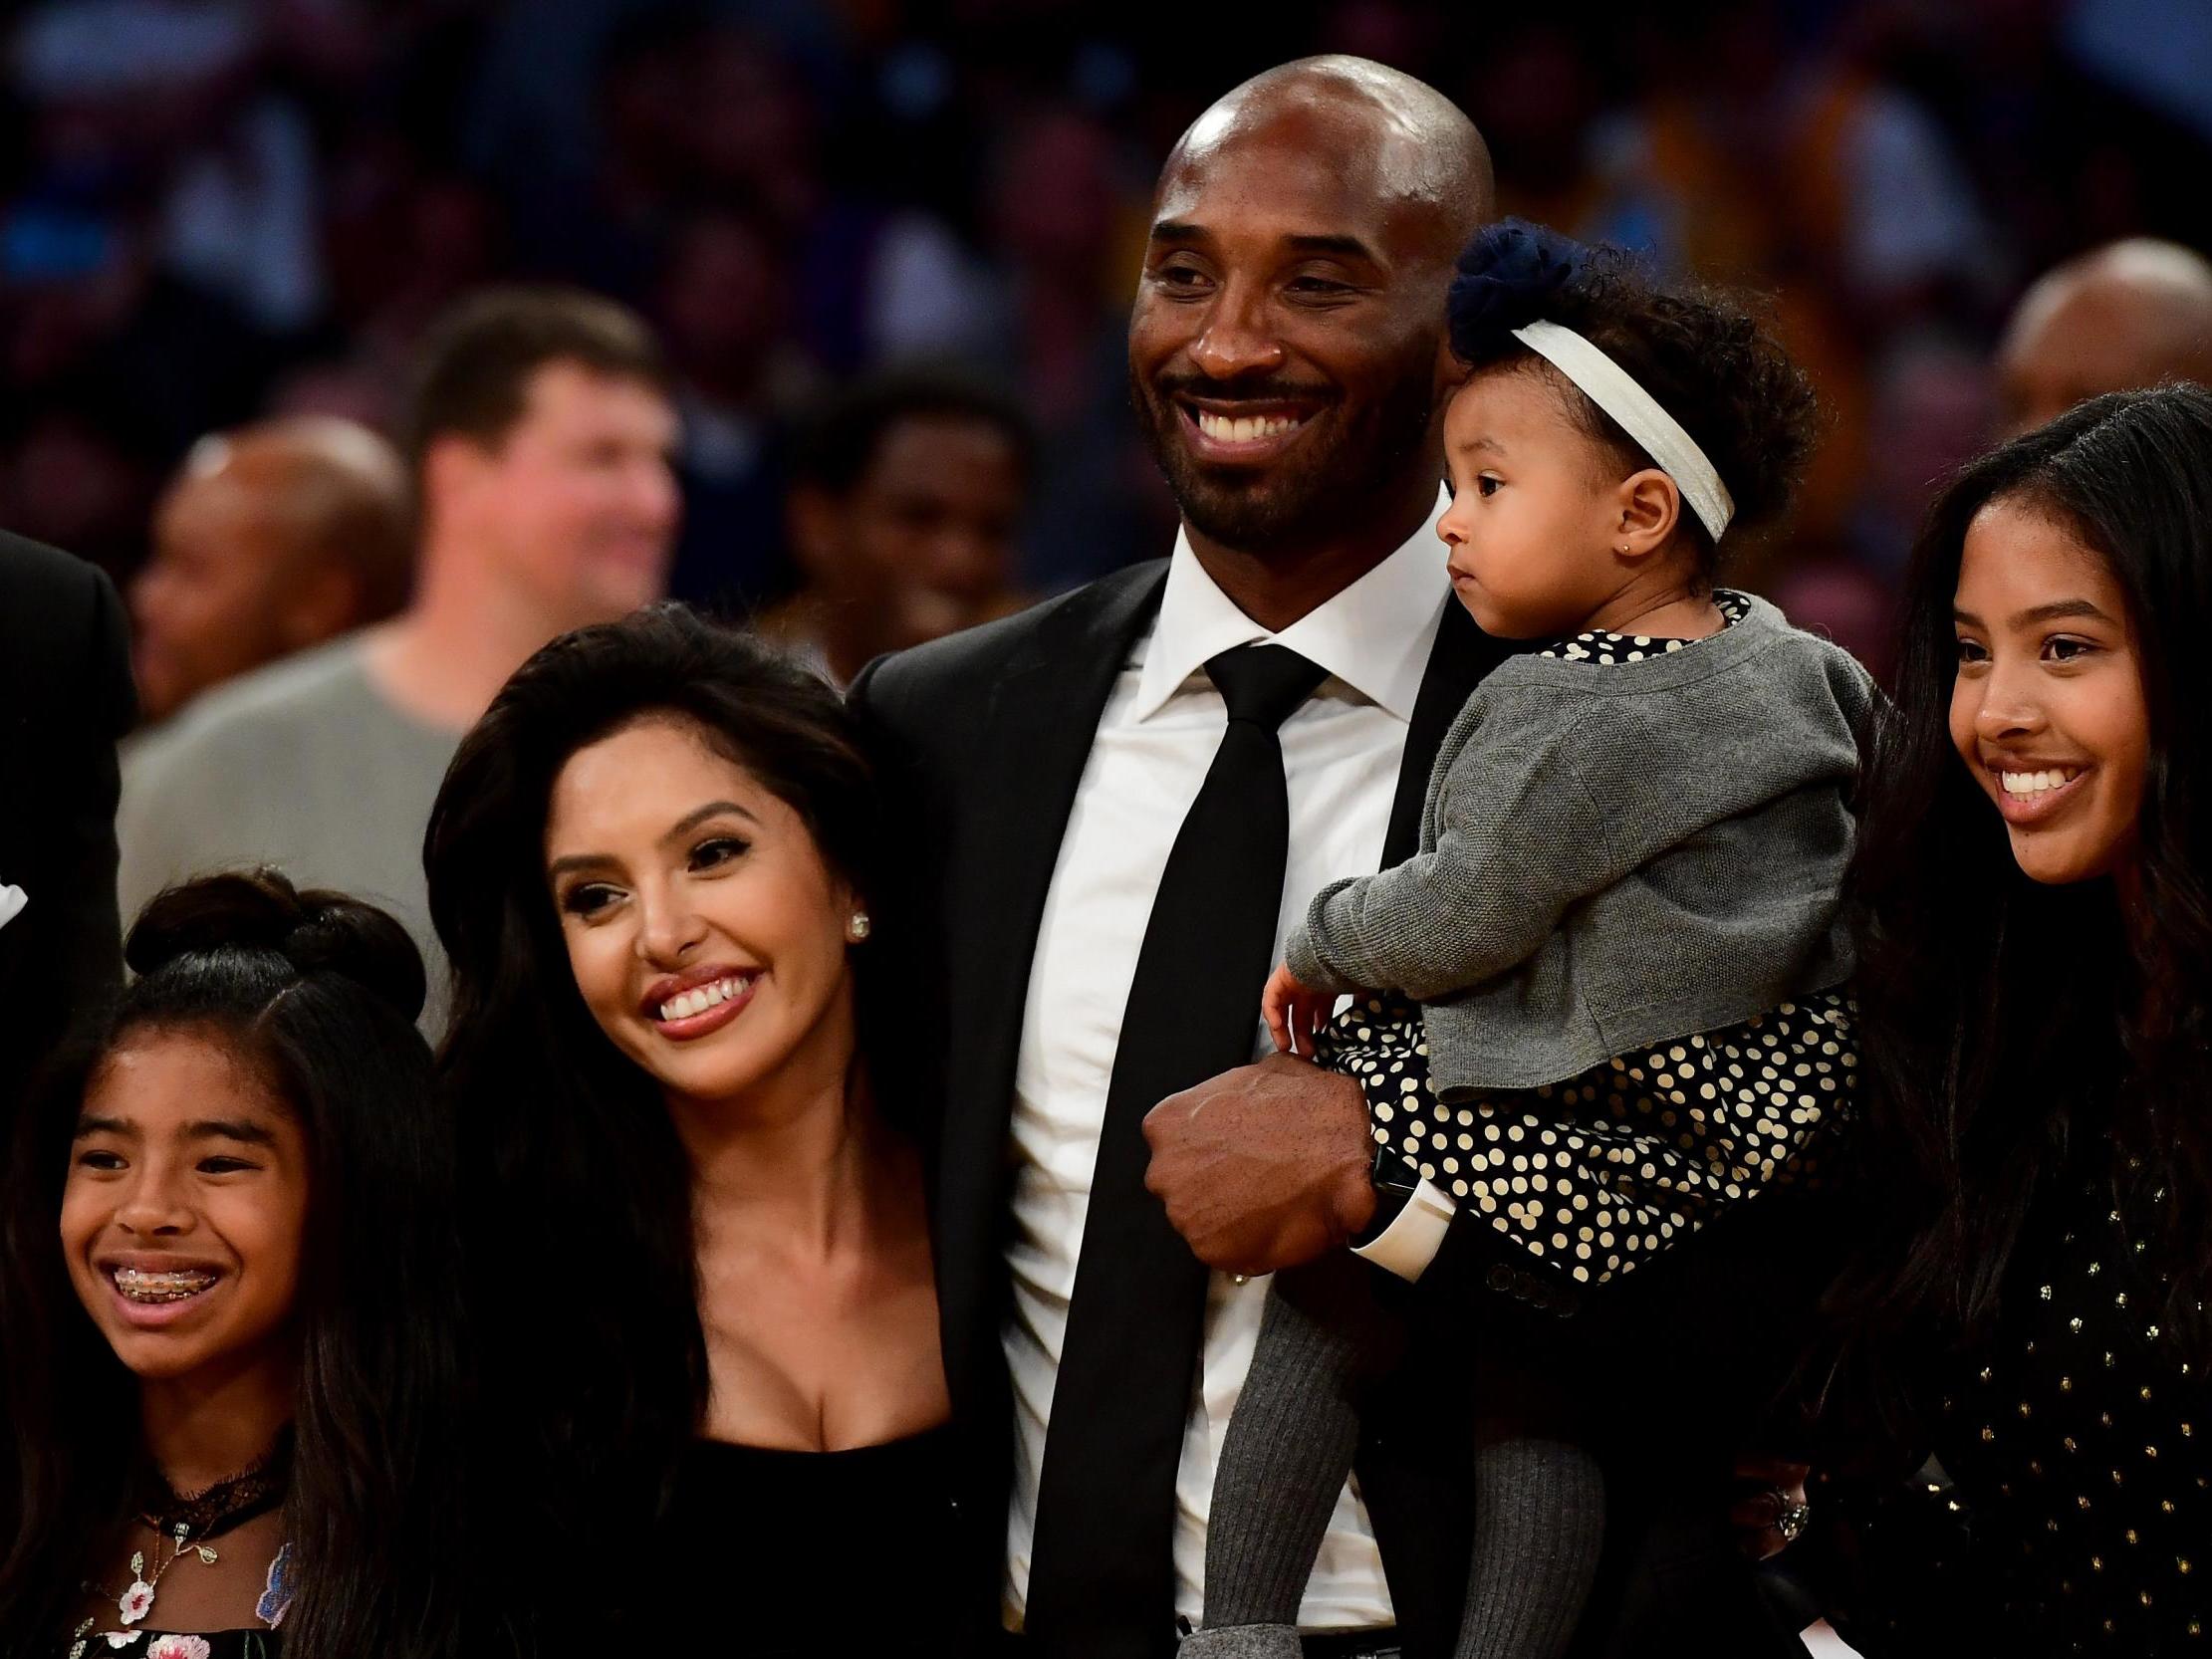 Kobe Bryant's wife files wrongful death lawsuit claiming helicopter pilot was reckless, report says